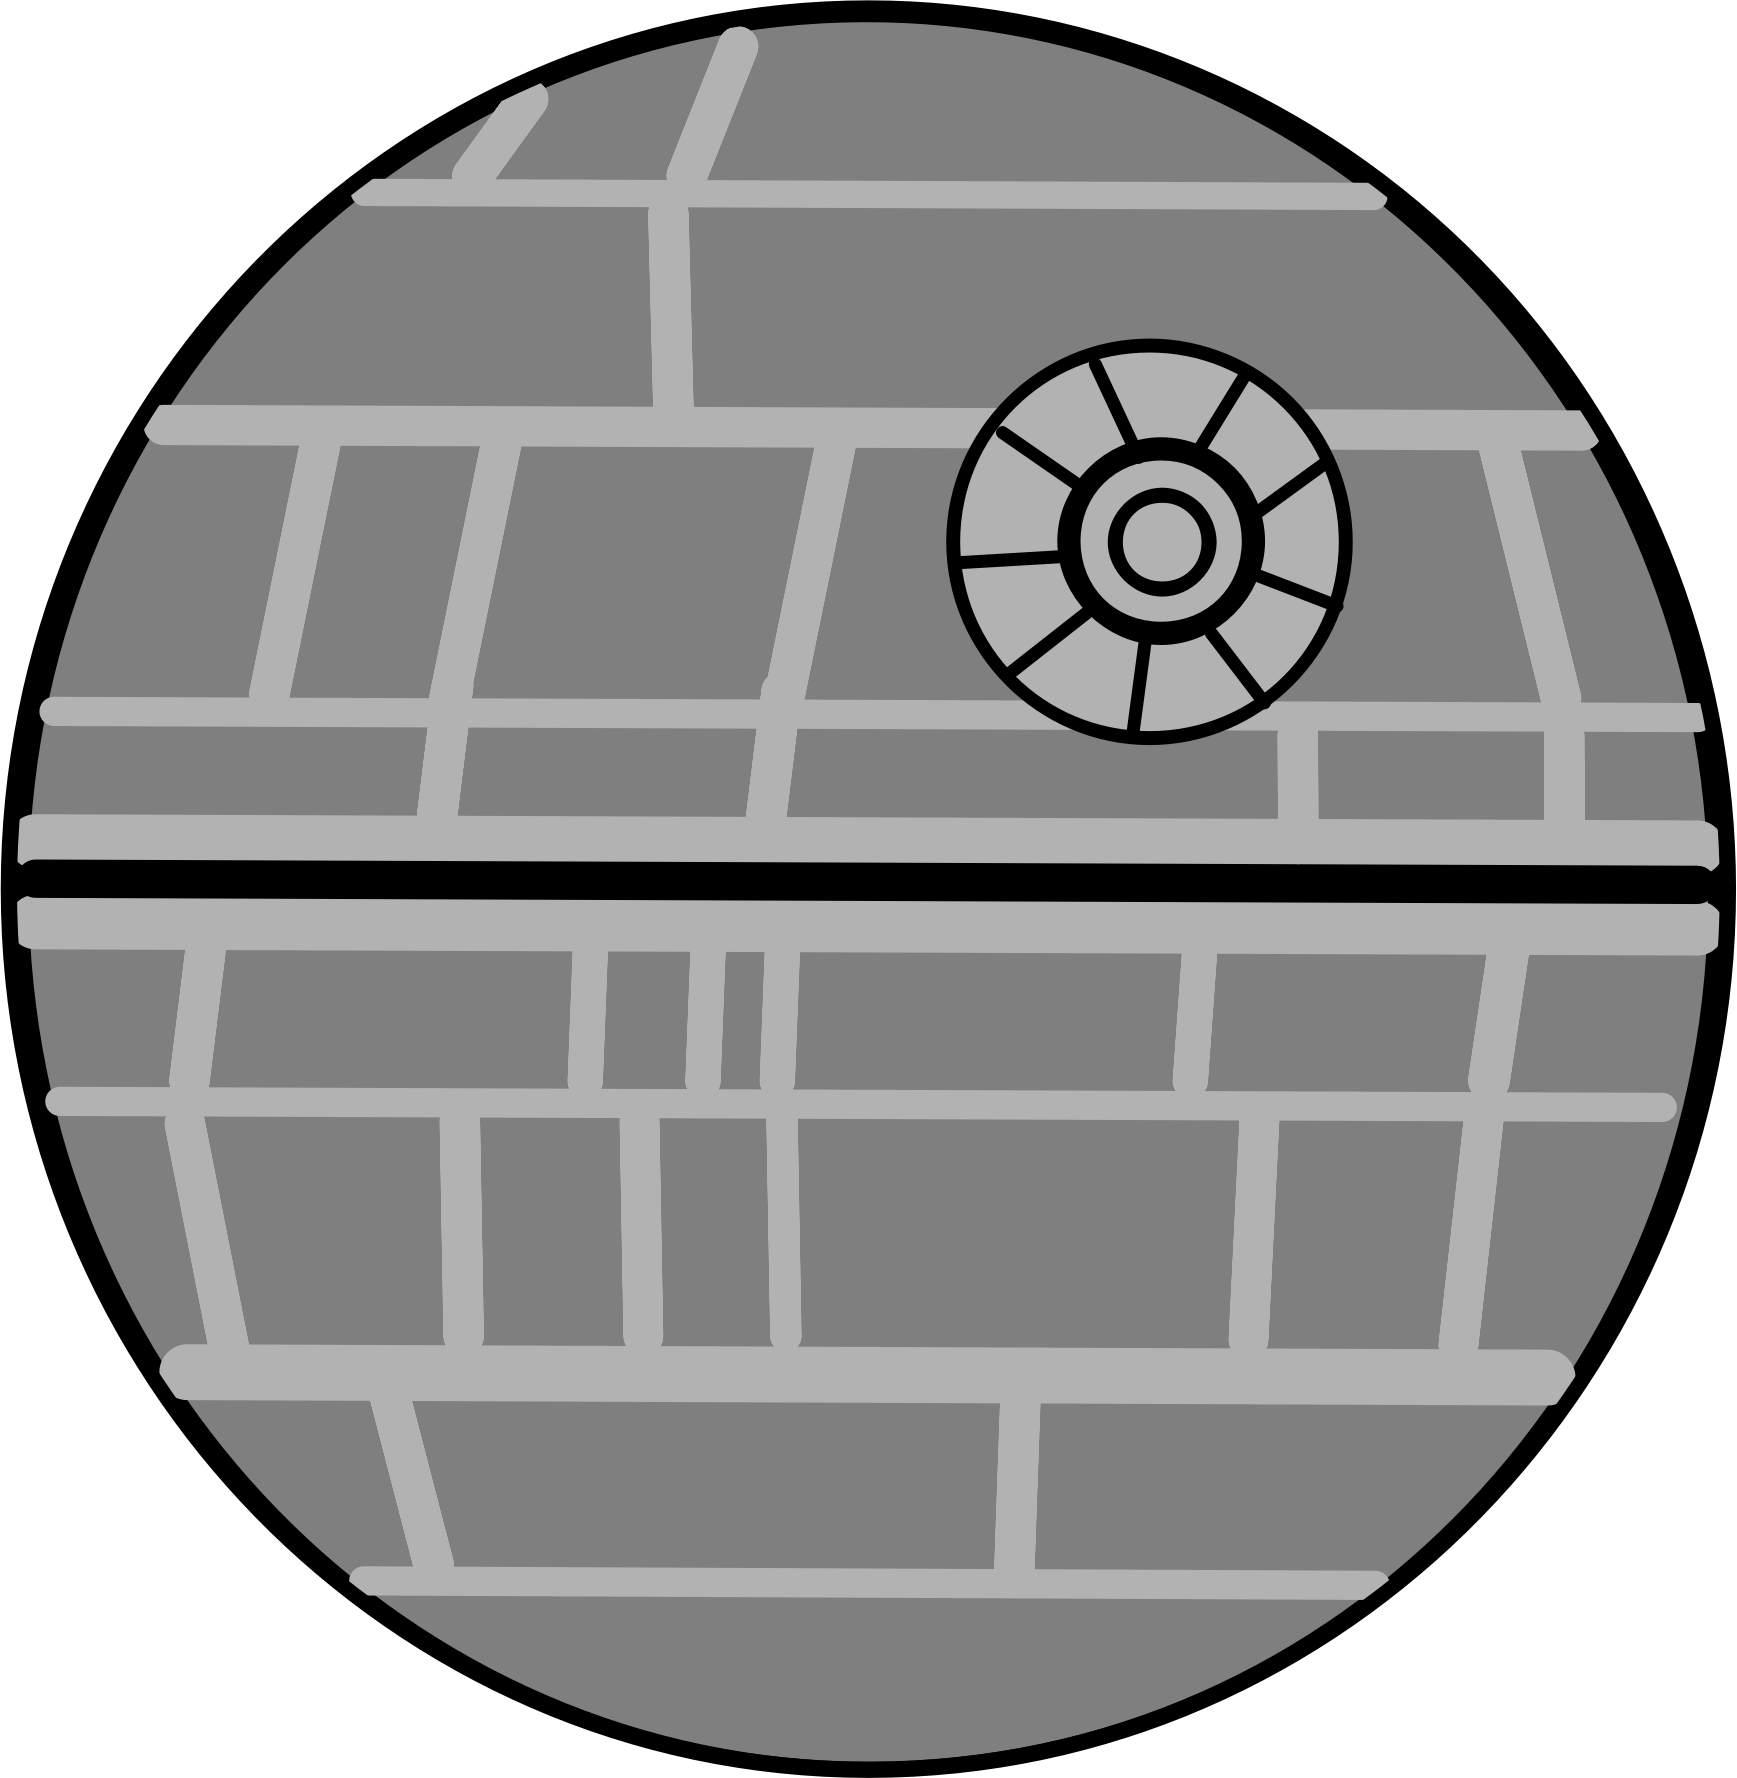 A Grey And White Circular Object With A Round Center